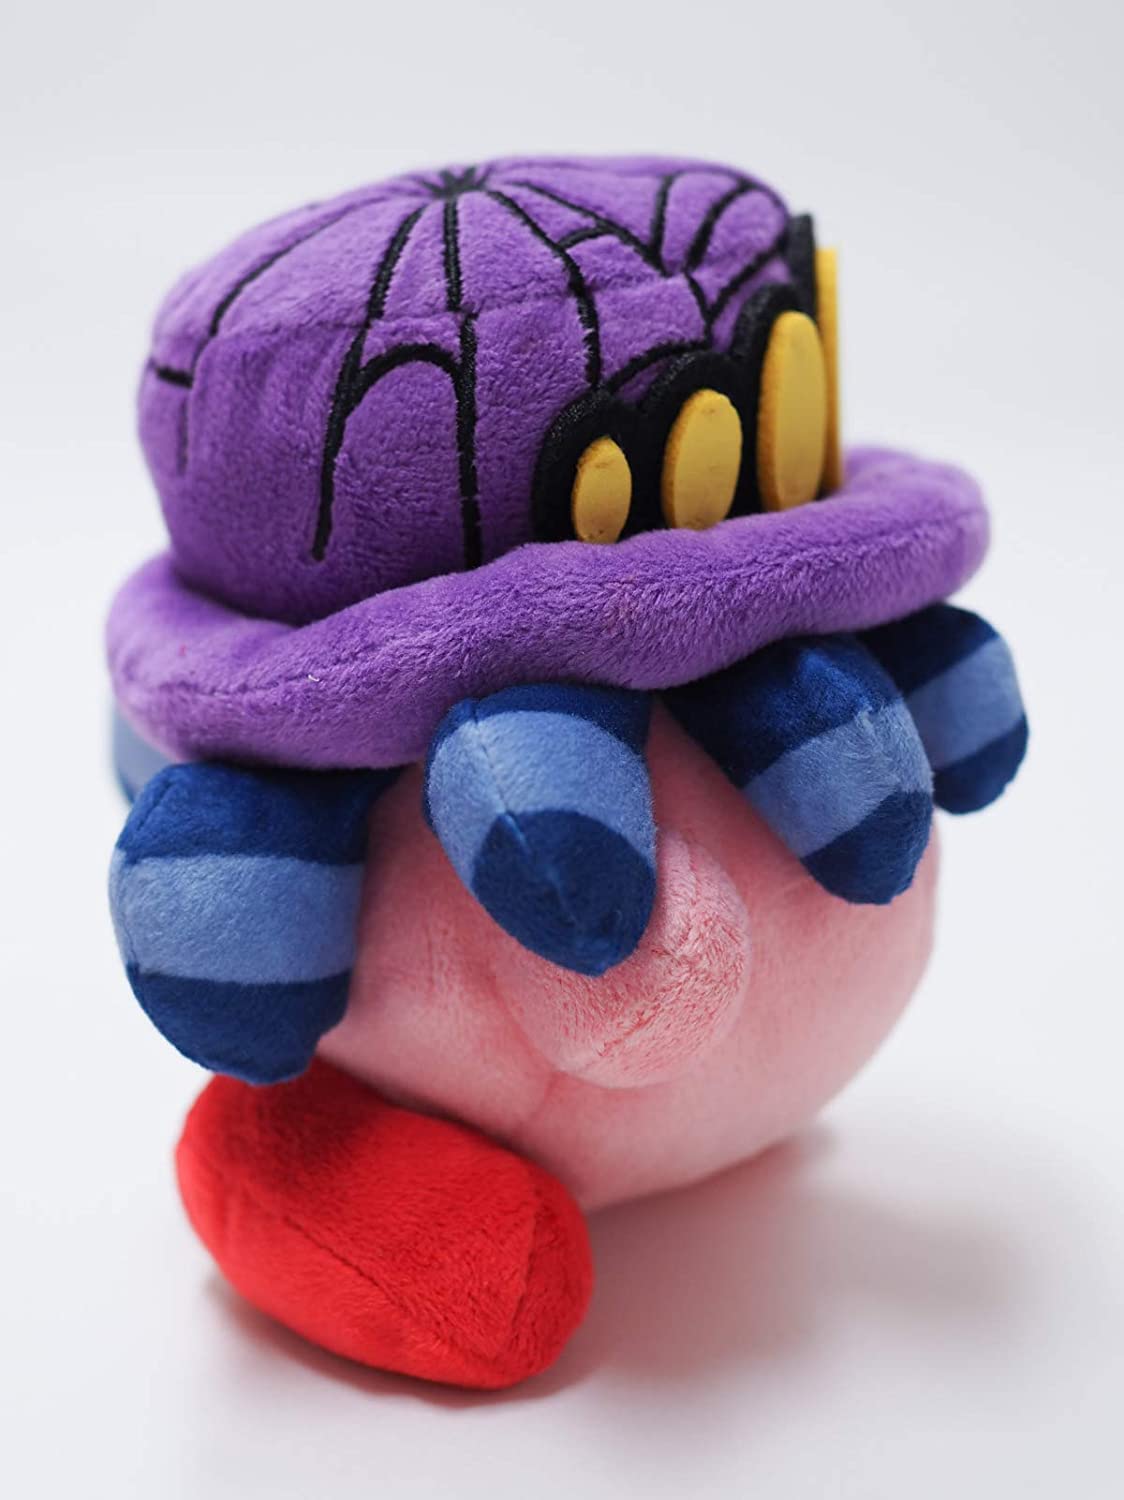 Sanei All Star Collection 6 Inch Plush - Spider Kirby KP32